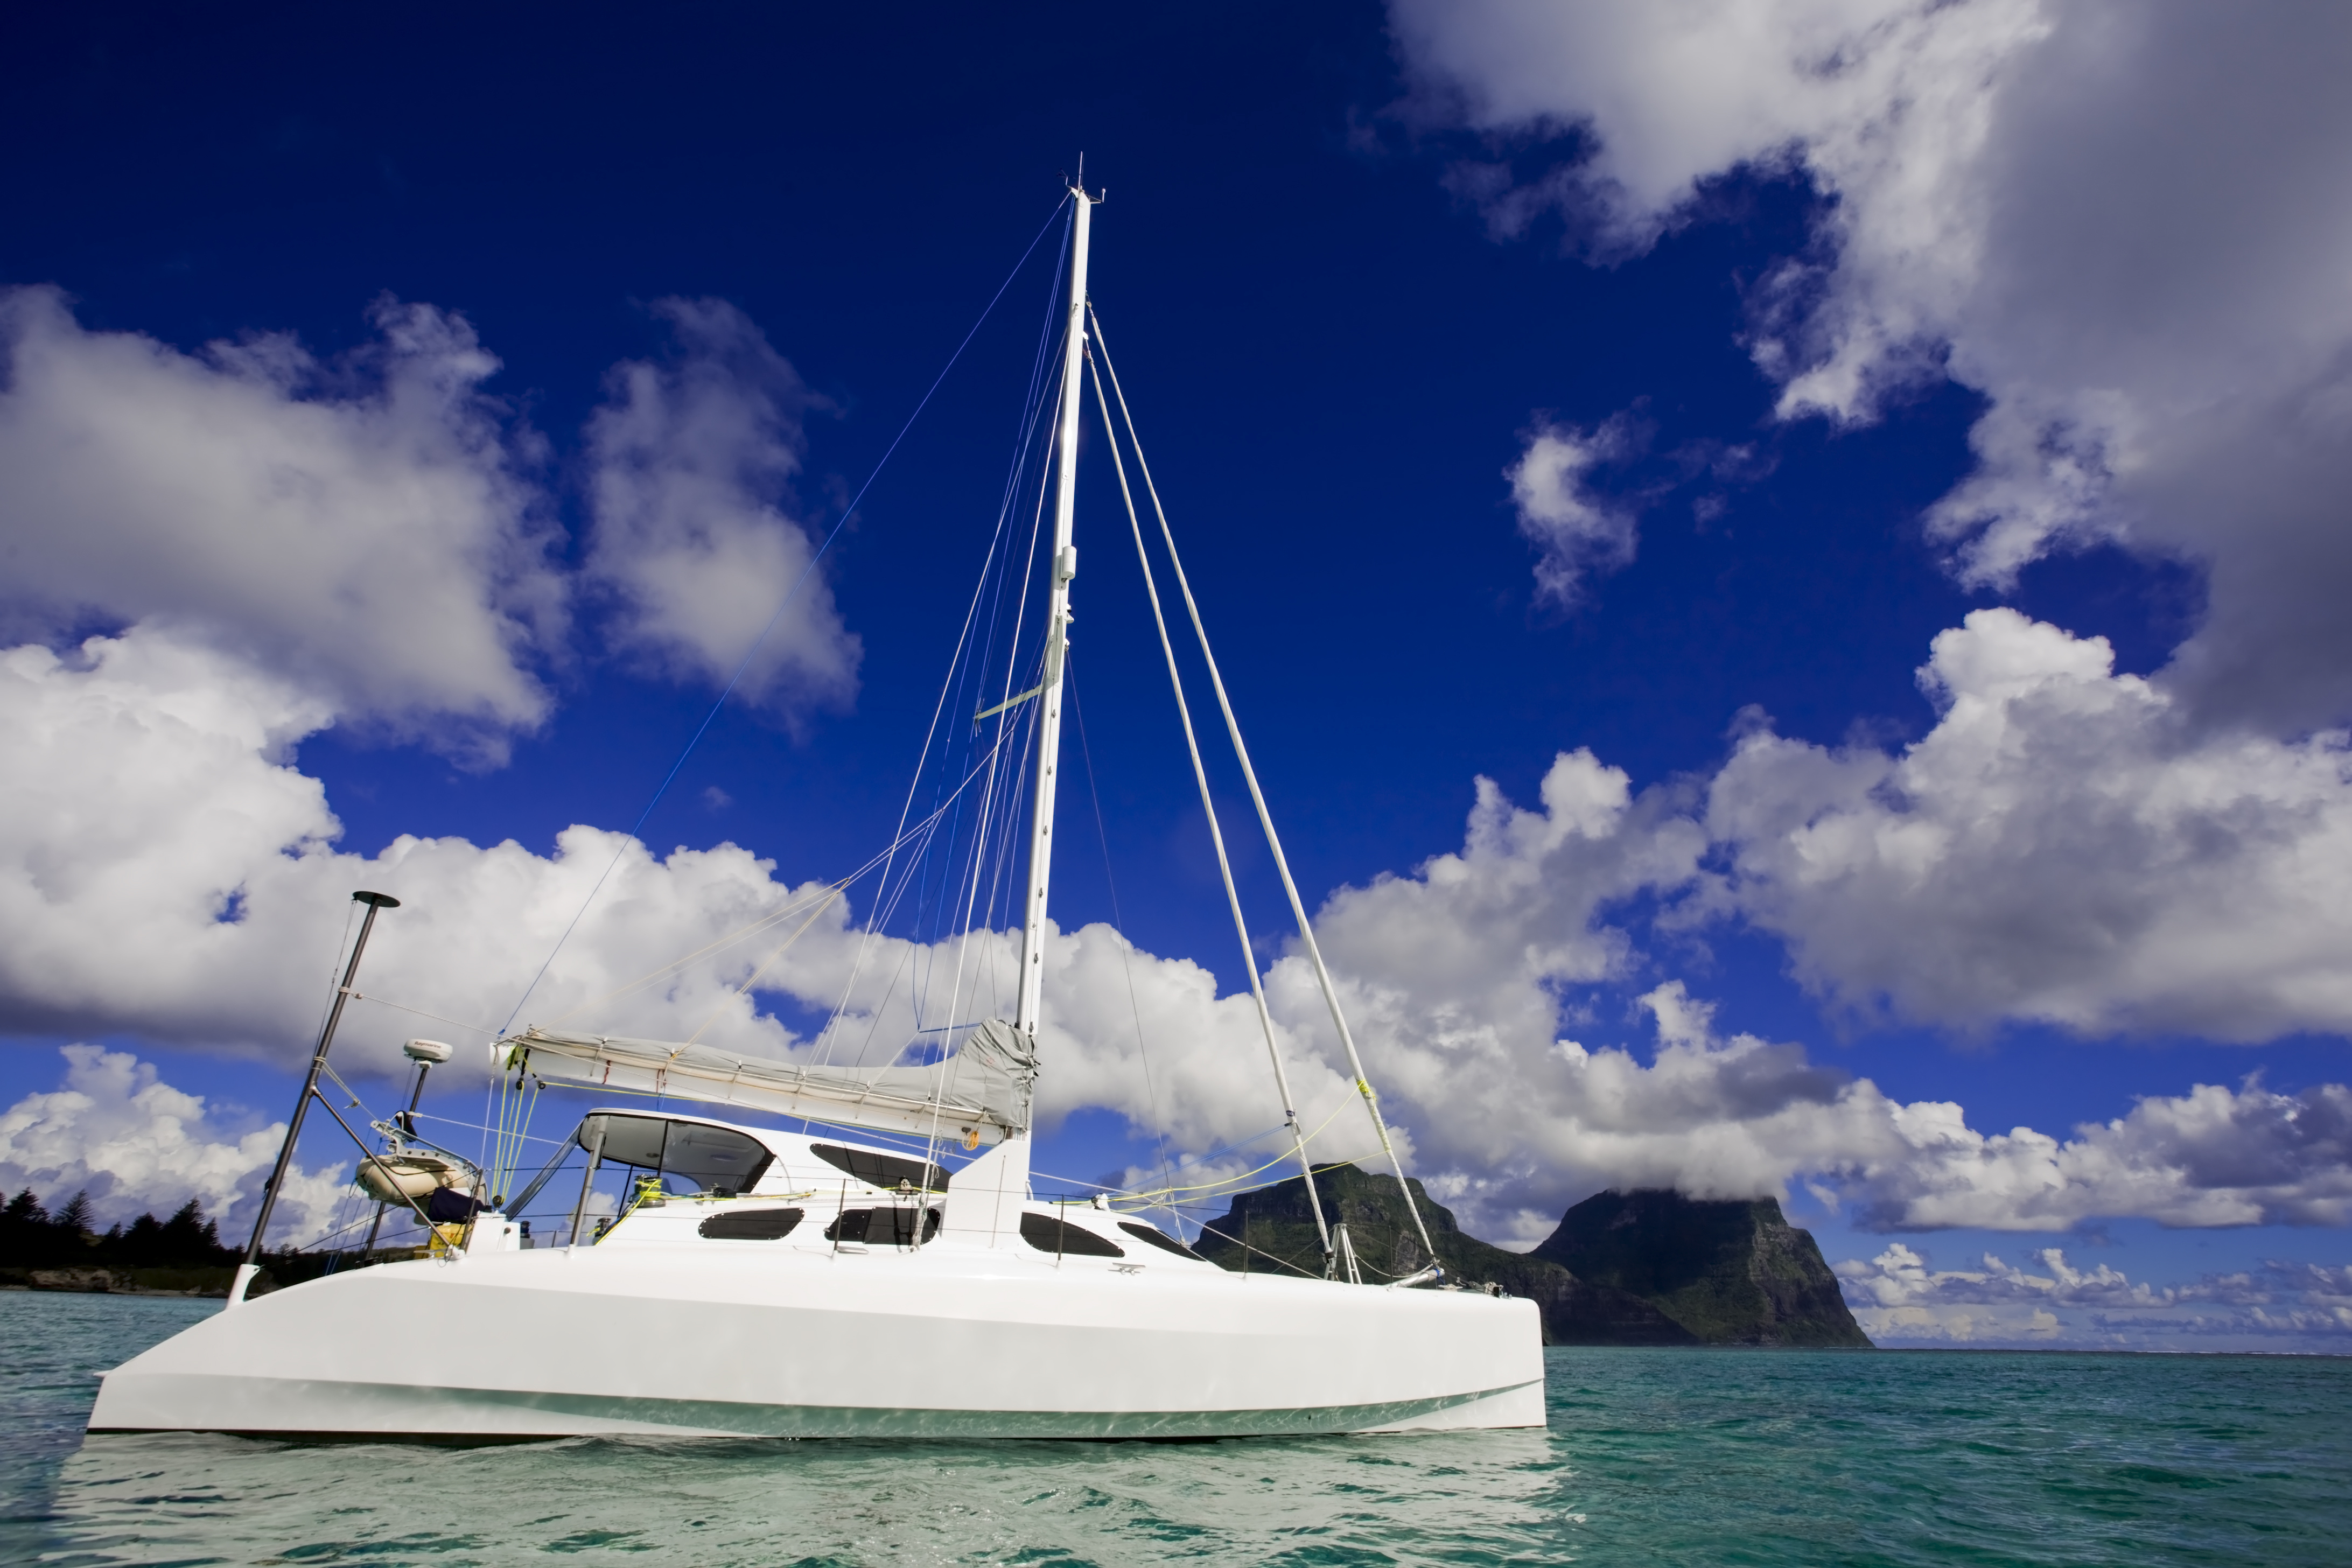 Cataman sailing to Lord Howe Island, New South Wales